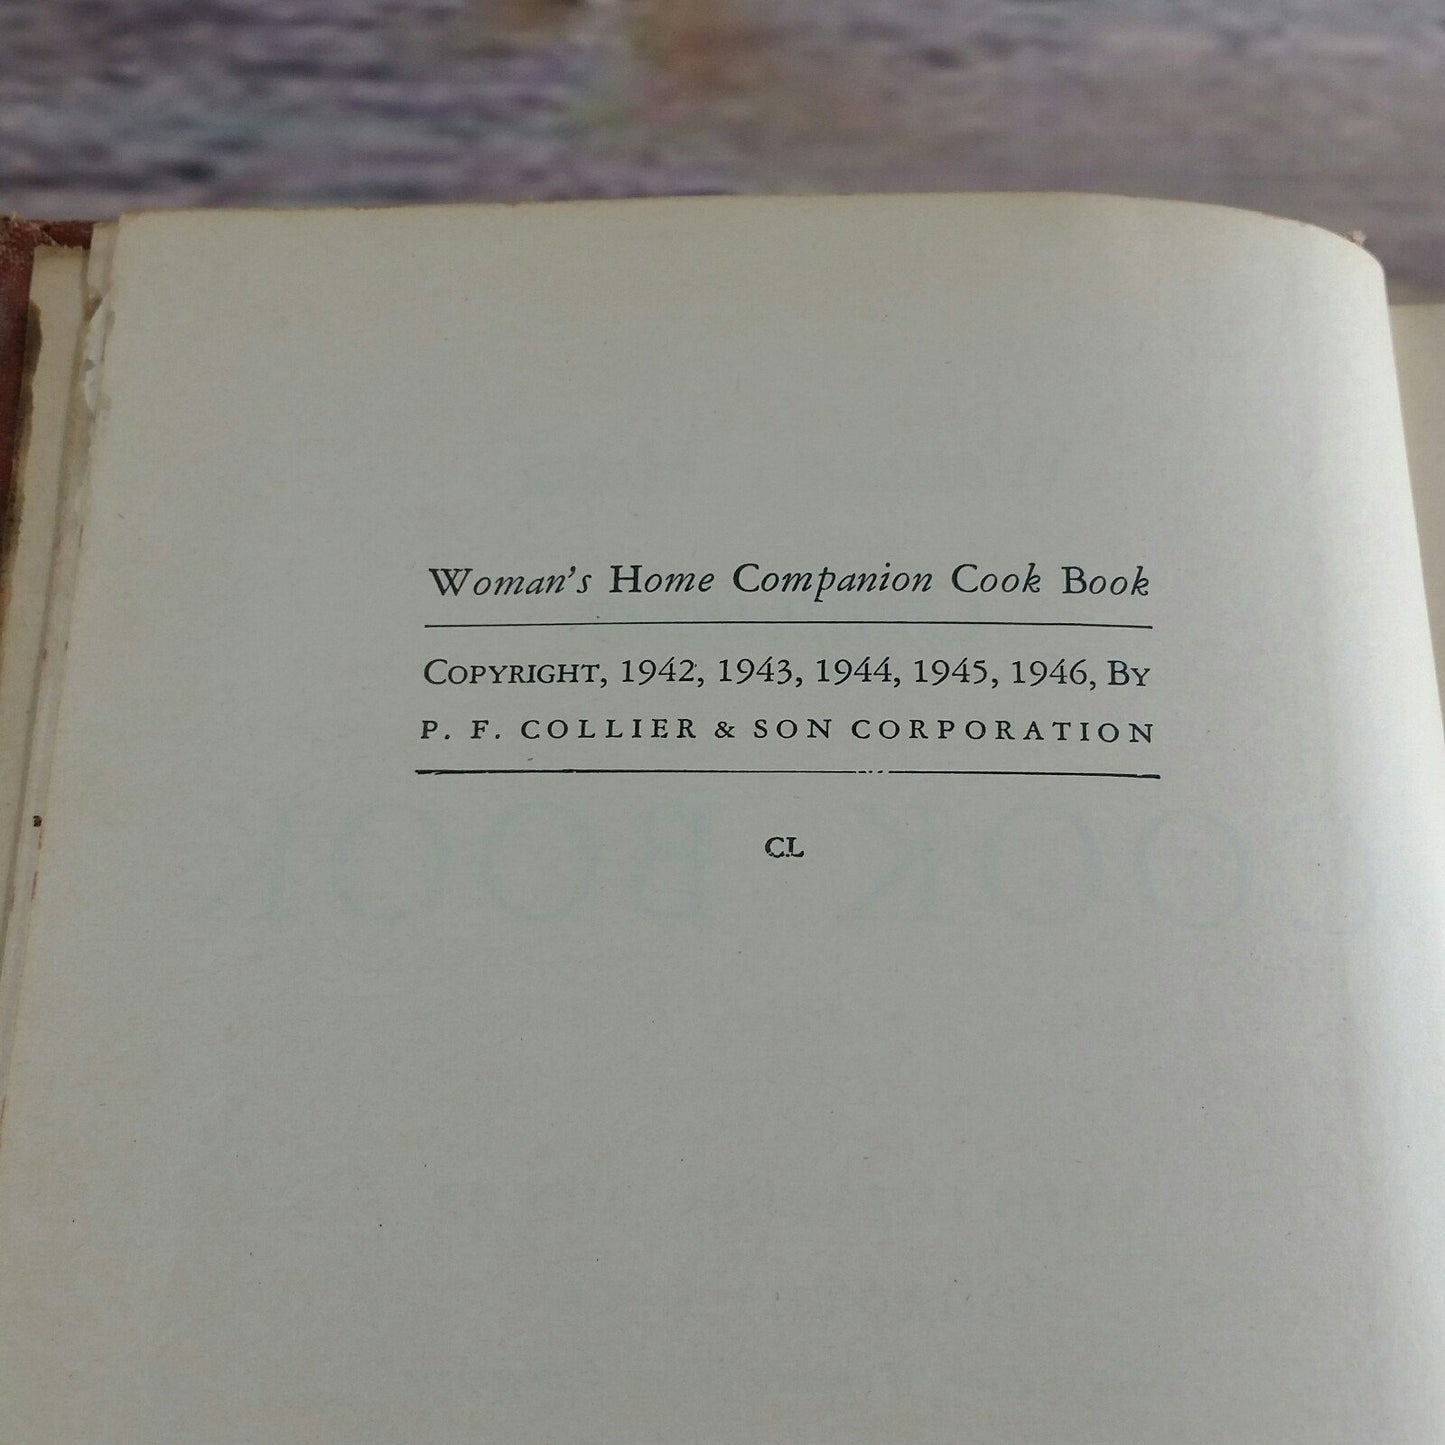 Vintage Cookbook Woman's Home Companion Cookbook 1946 by Dorothy Kirk Recipes Hardcover